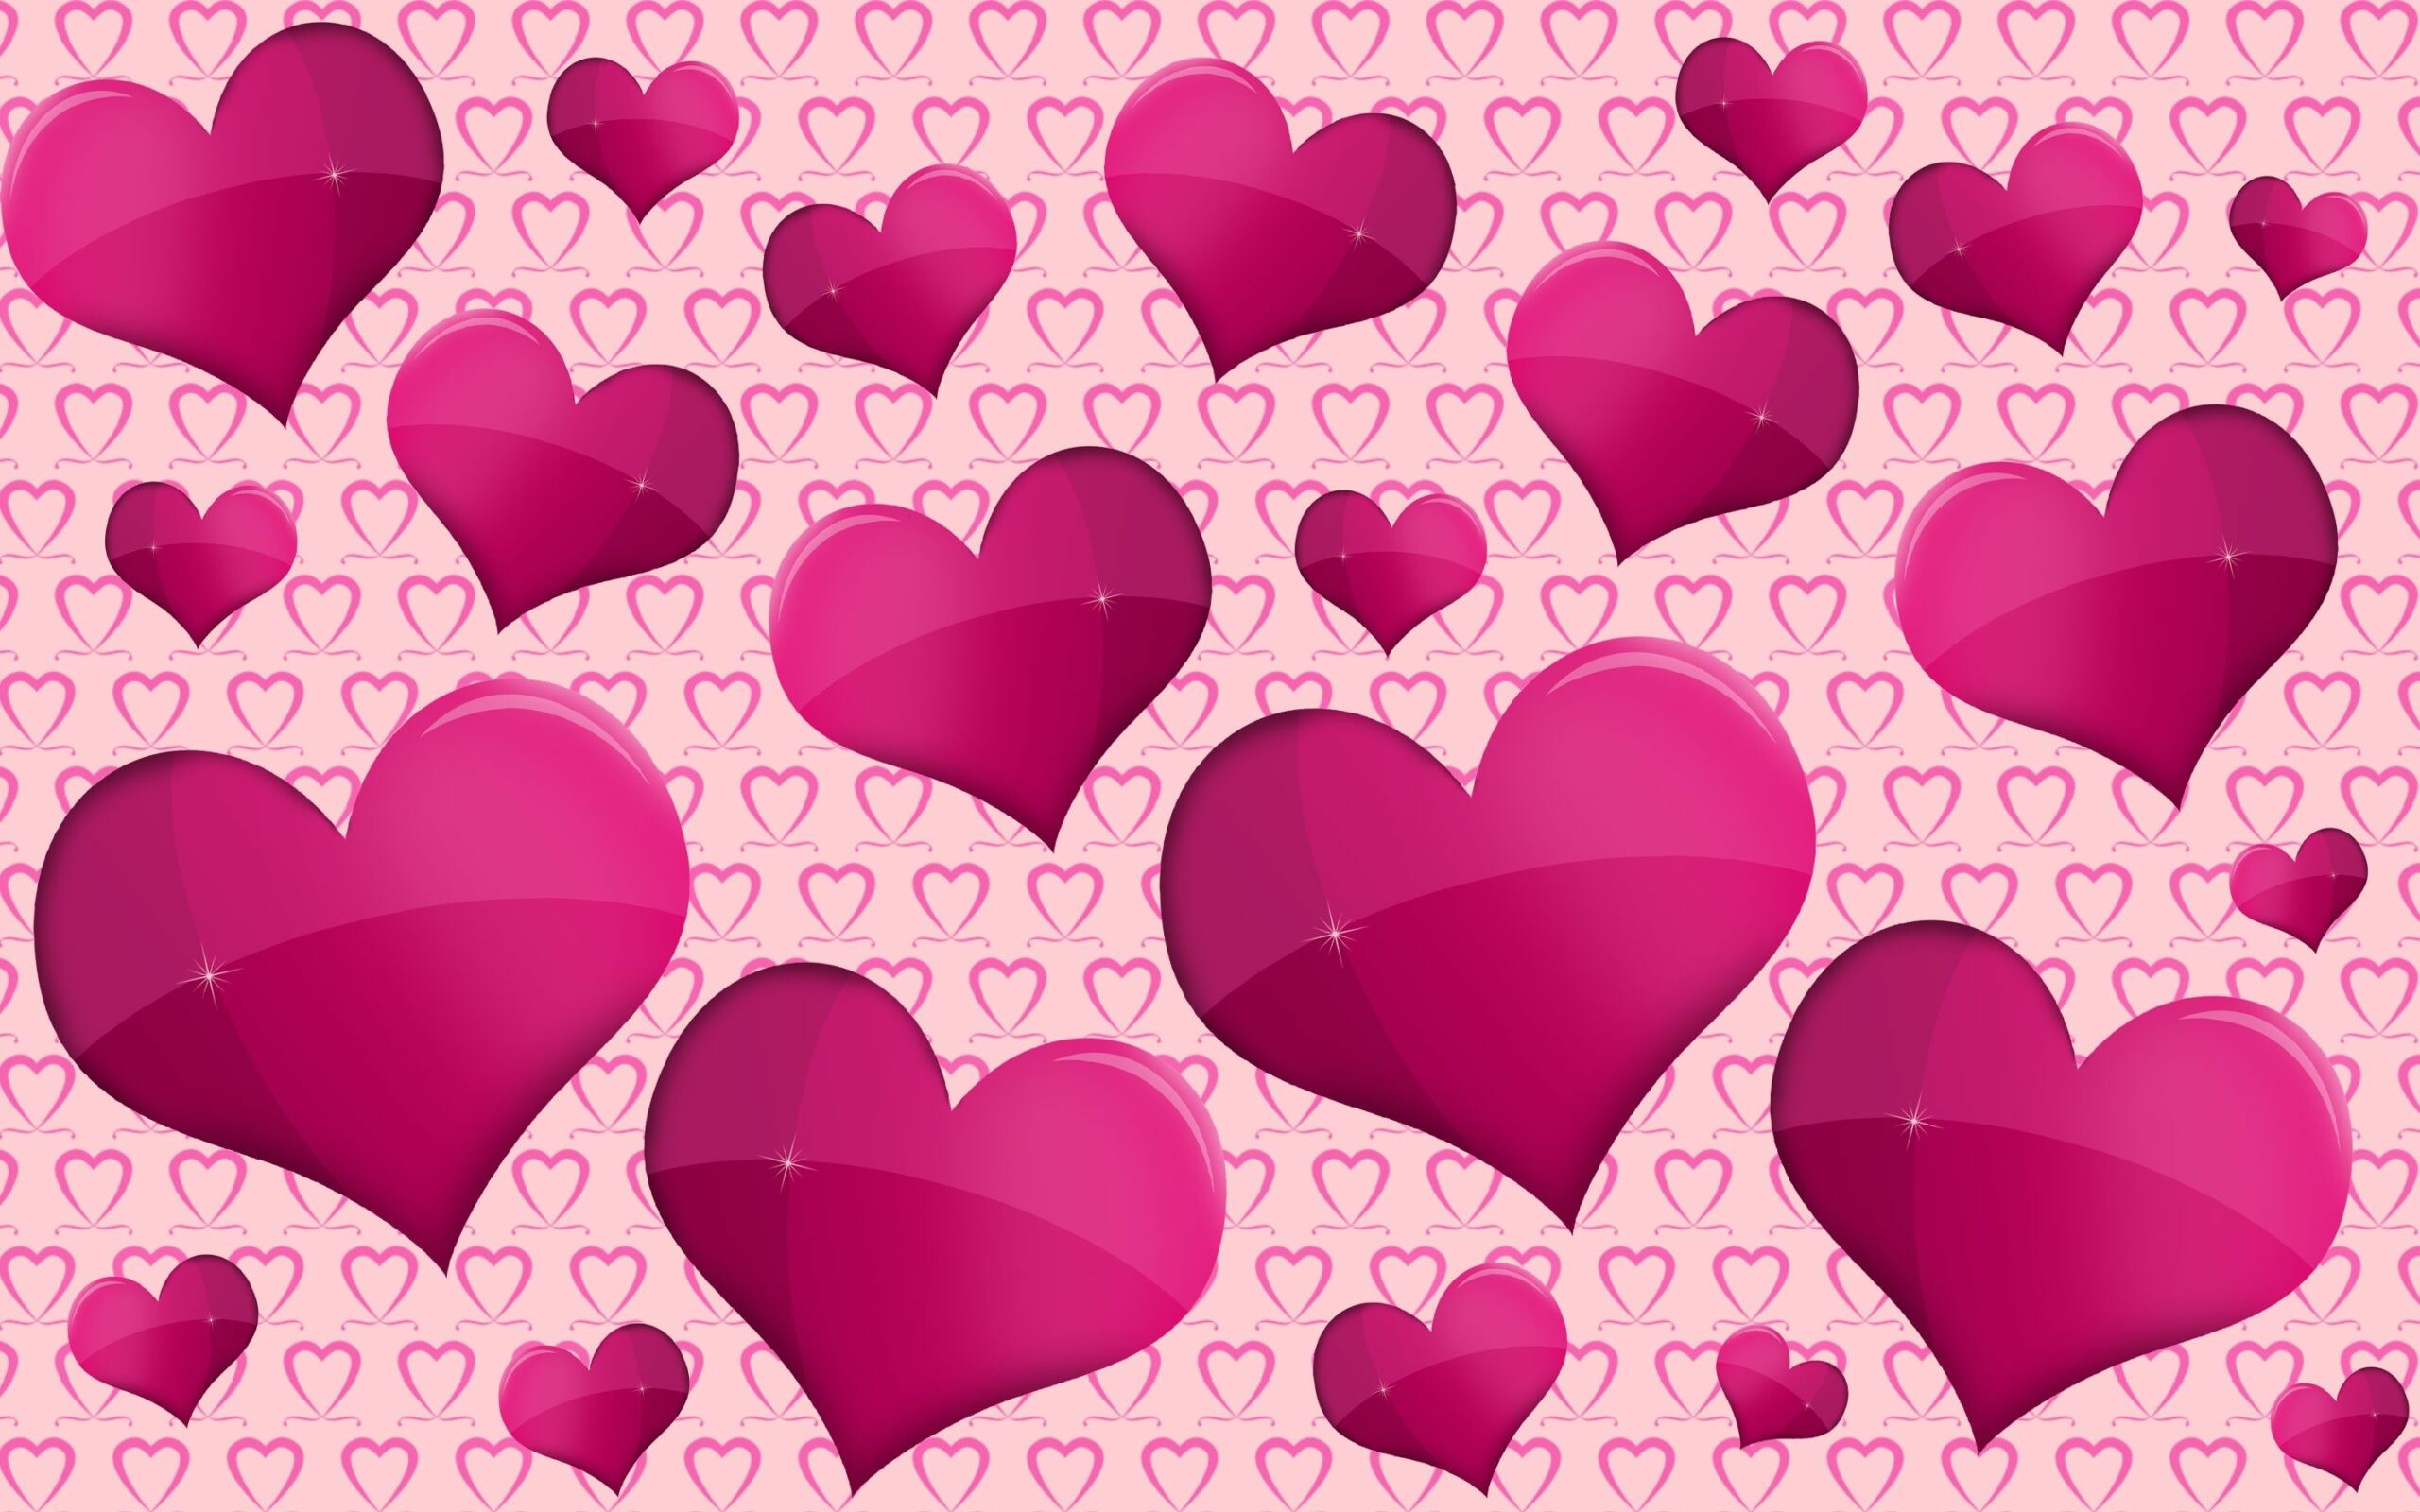 Heart: A symbol of romance and medieval courtly love. 2560x1600 HD Background.